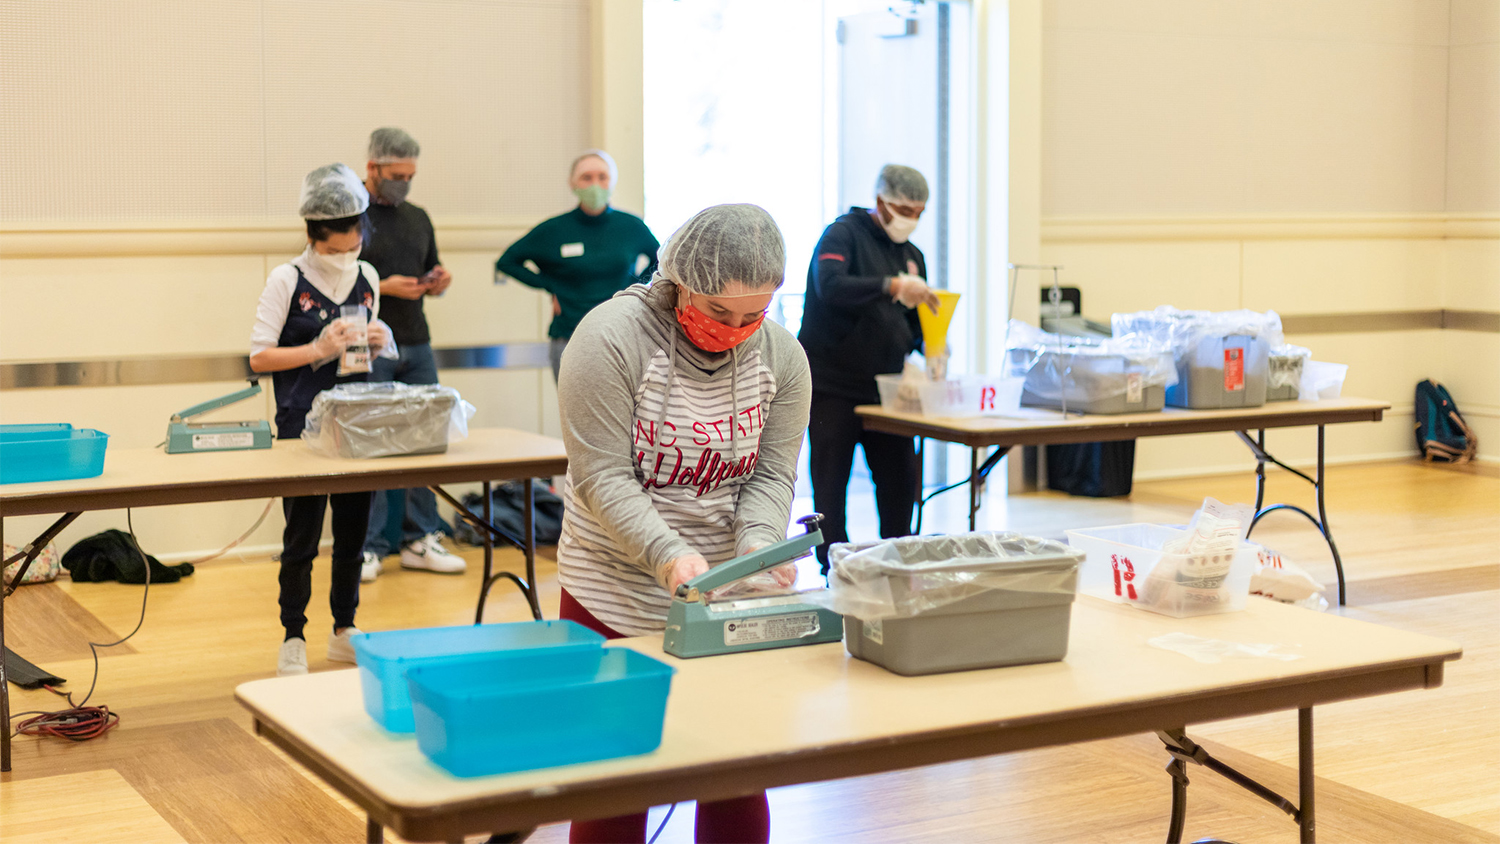 Students package meals at the Rise Against Hunger event in Talley Student Union during Winter Welcome Week